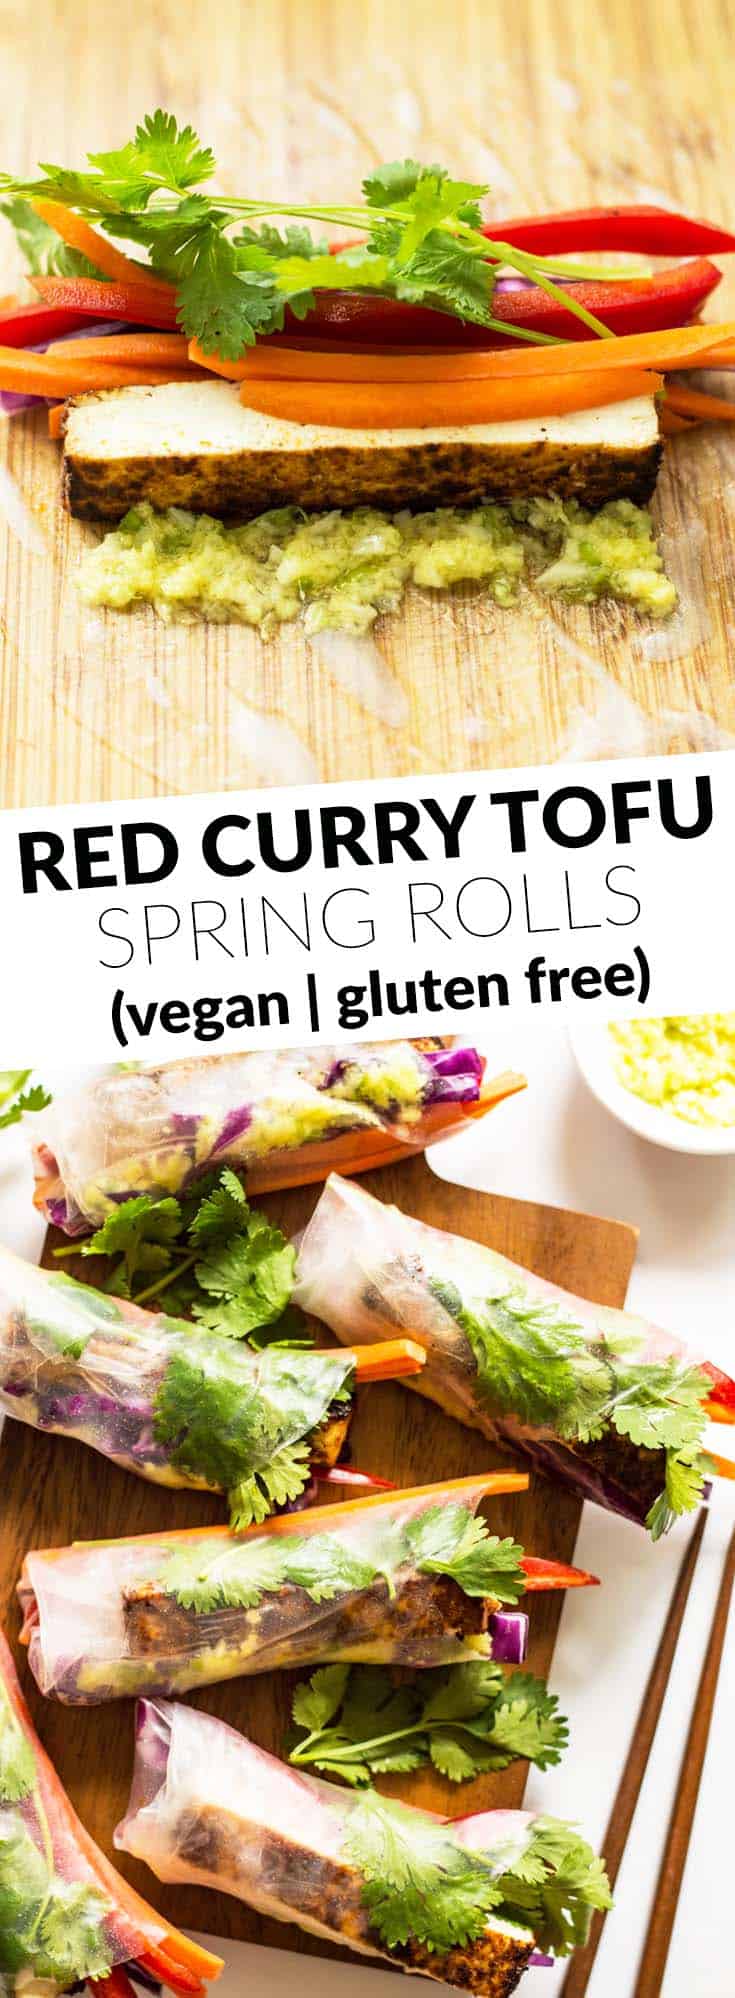 Red Curry Brown Sugar Tofu Spring Rolls - the perfect healthy vegan and gluten-free appetizer by @healthynibs